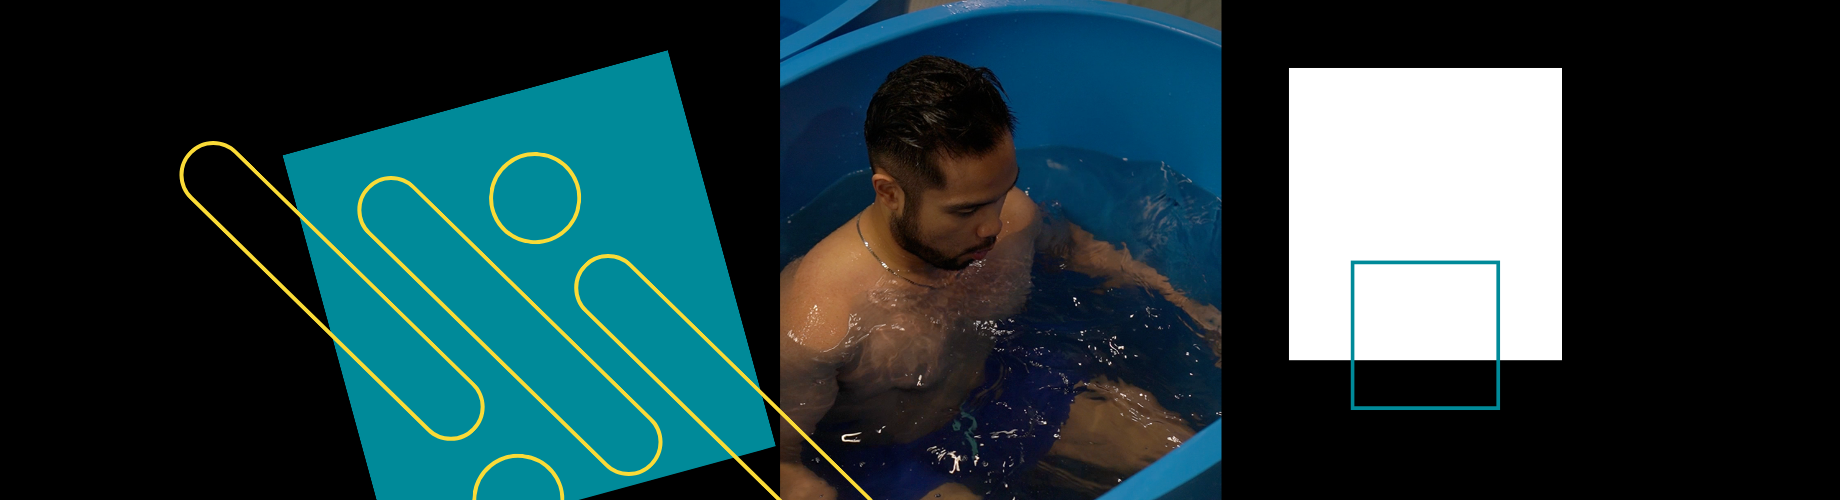 Efficient wellness and recovery session at Cove Sports Recovery in Vancouver featuring hot and cold plunge pools, air compression therapy equipment, and a stretching area, designed for busy individuals seeking quick and effective health solutions.